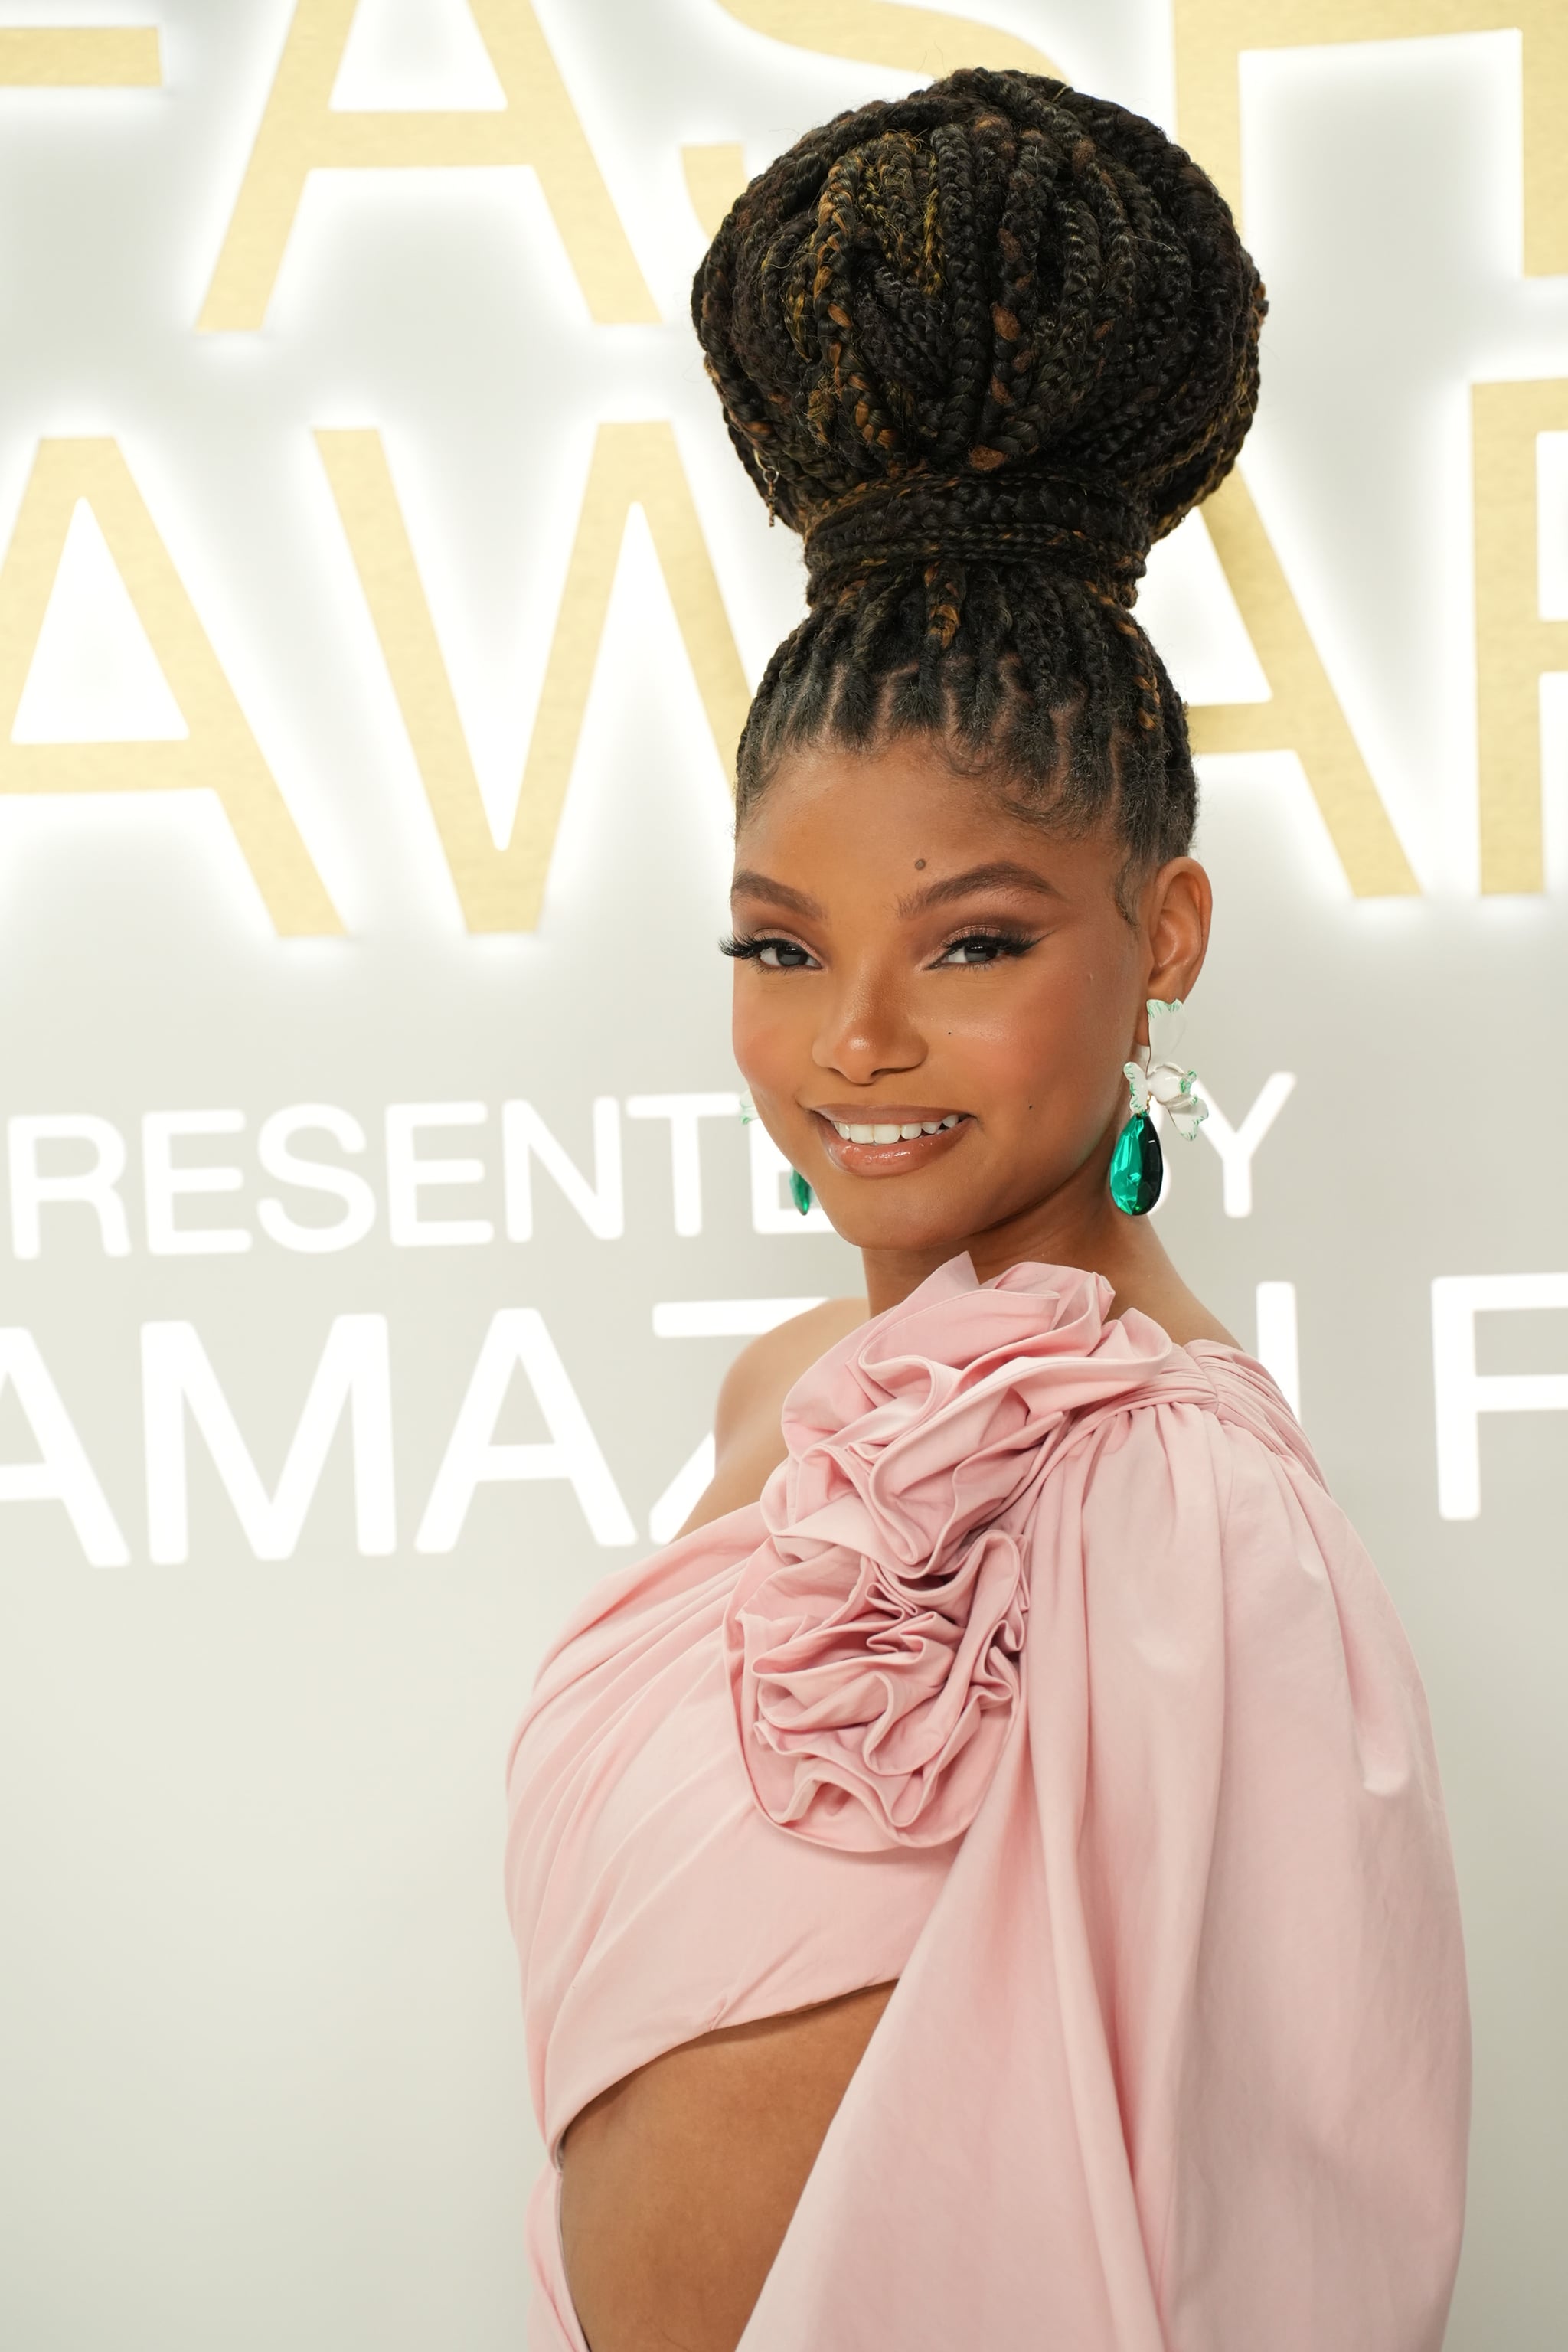 NEW YORK, NY - NOVEMBER 07: Halle Bailey attends 2022 CFDA Fashion Awards  on November 7, 2022 at Cipriani South Street in New York City. (Photo by Sean Zanni/Patrick McMullan via Getty Images)